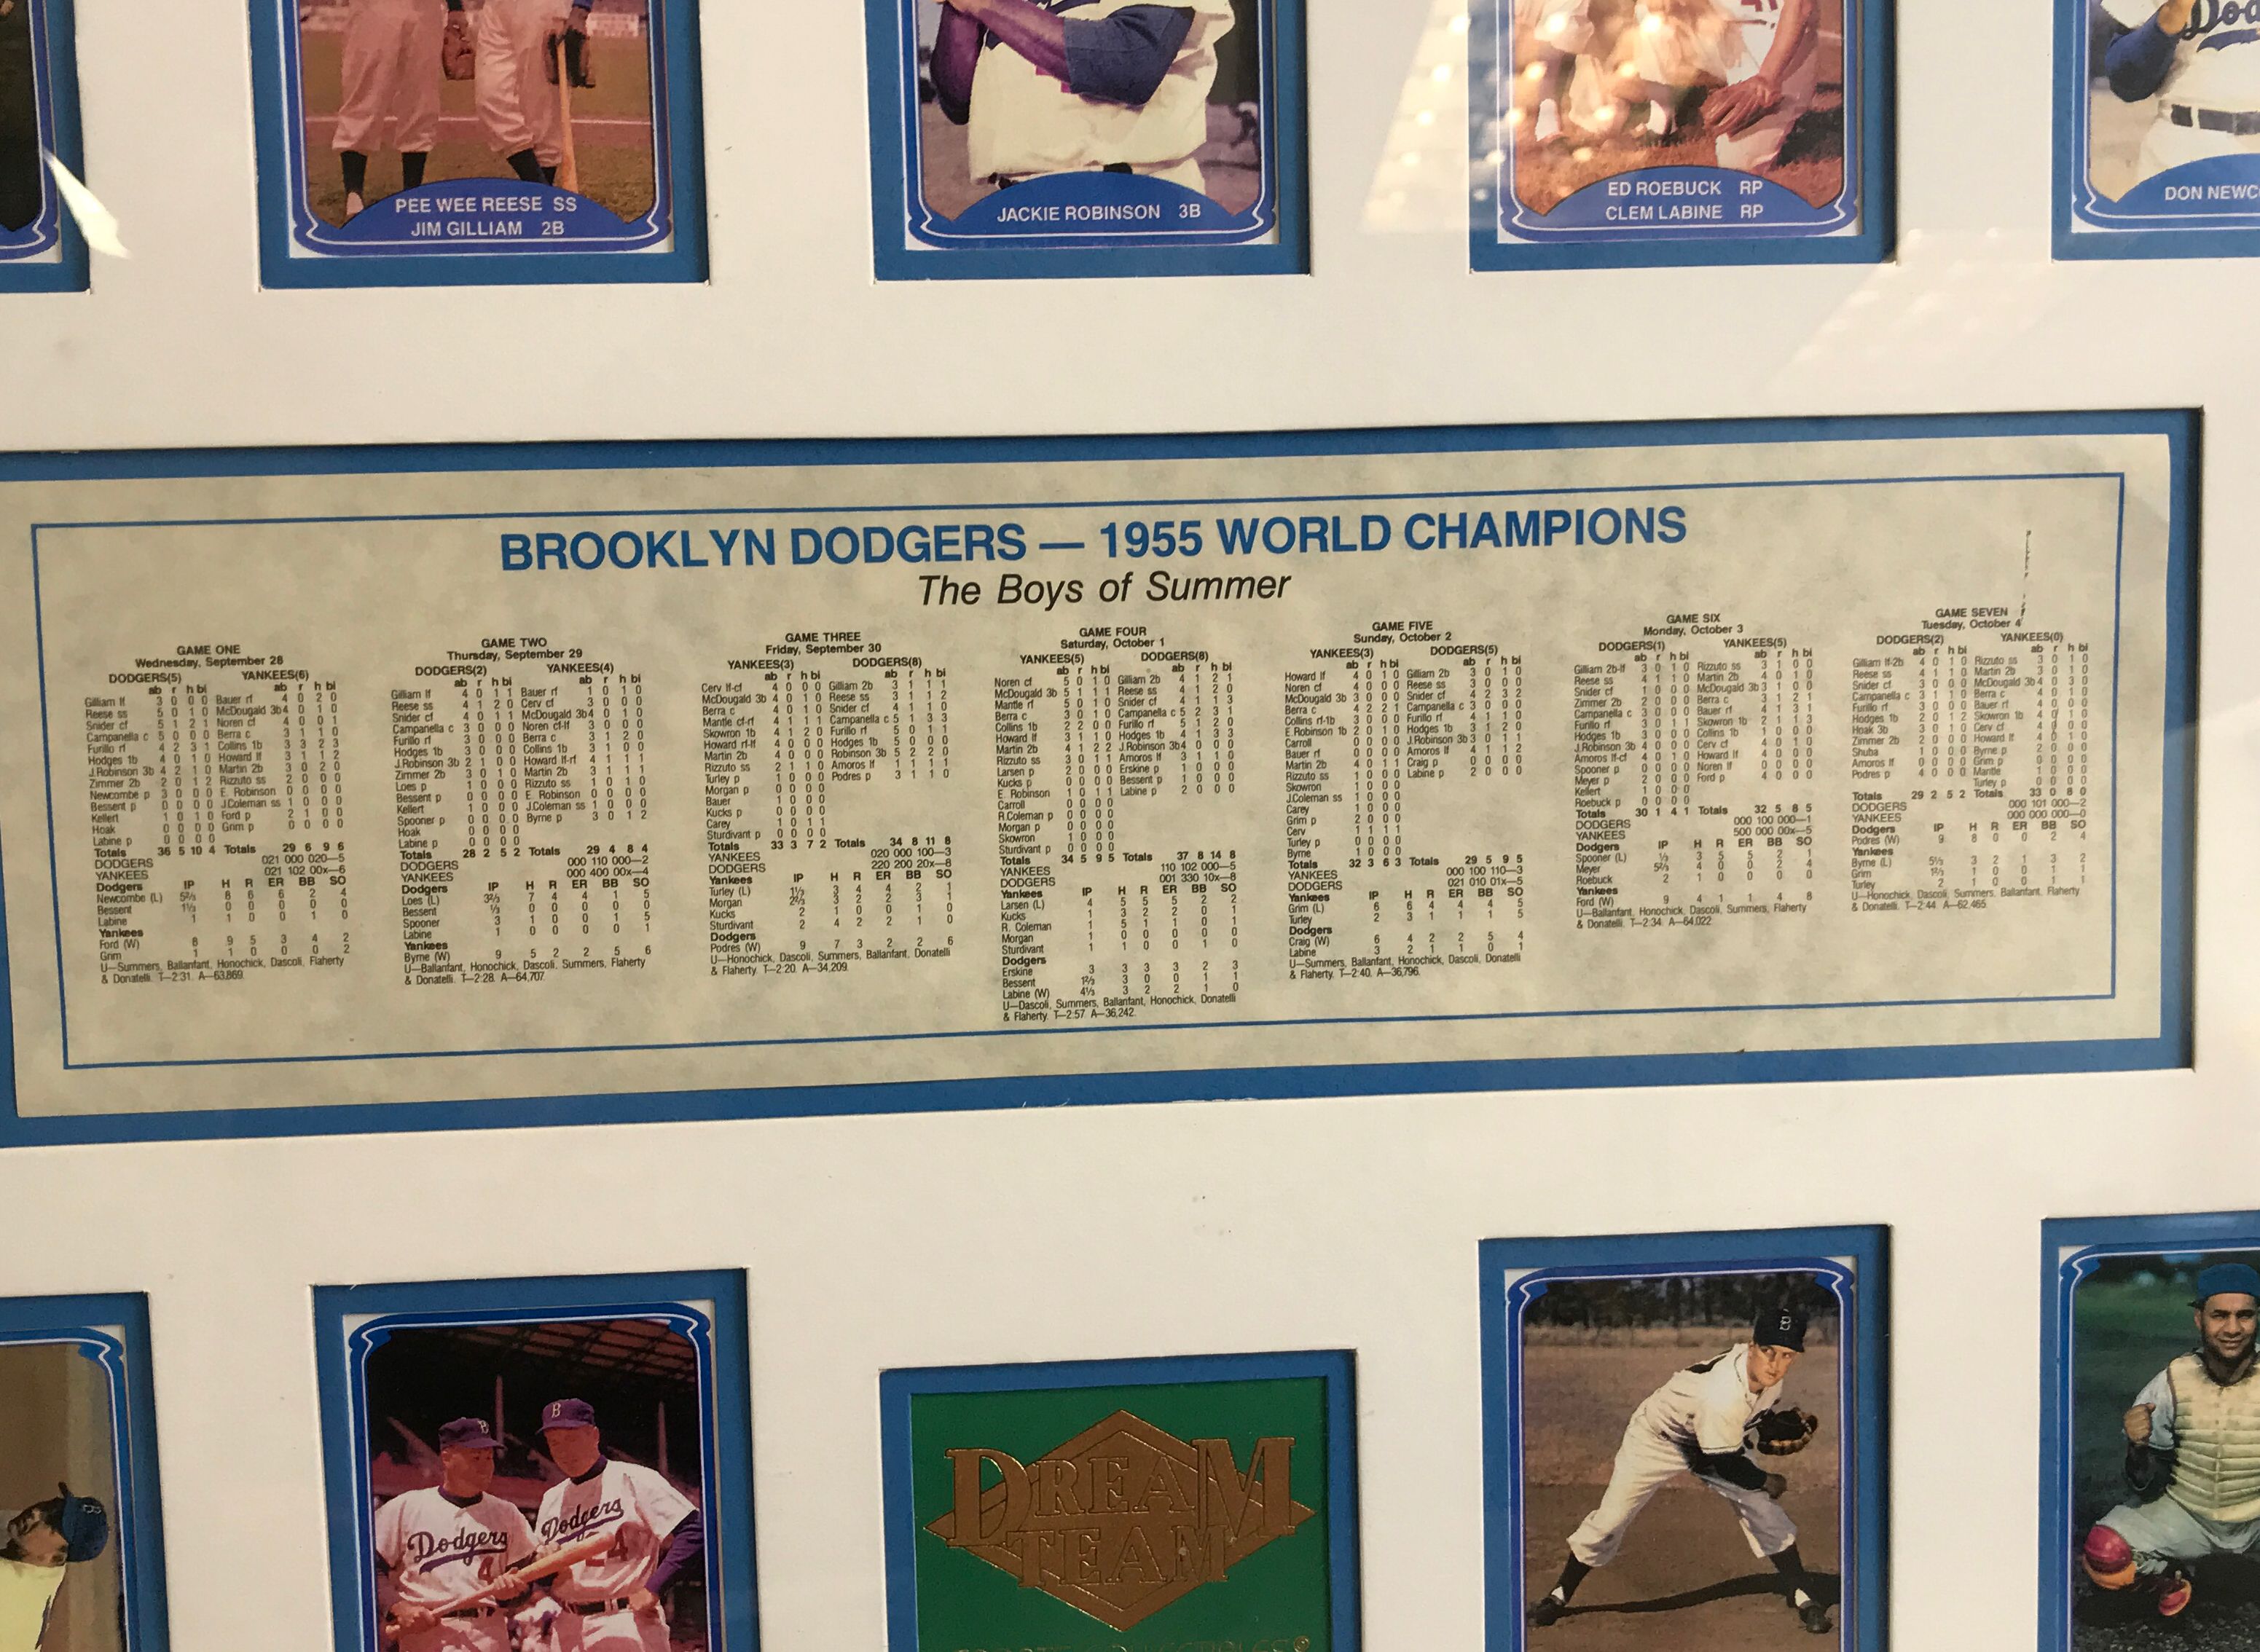 Brooklyn Dodgers 1955 World Champions "The Boys of Summer" Framed Collectible